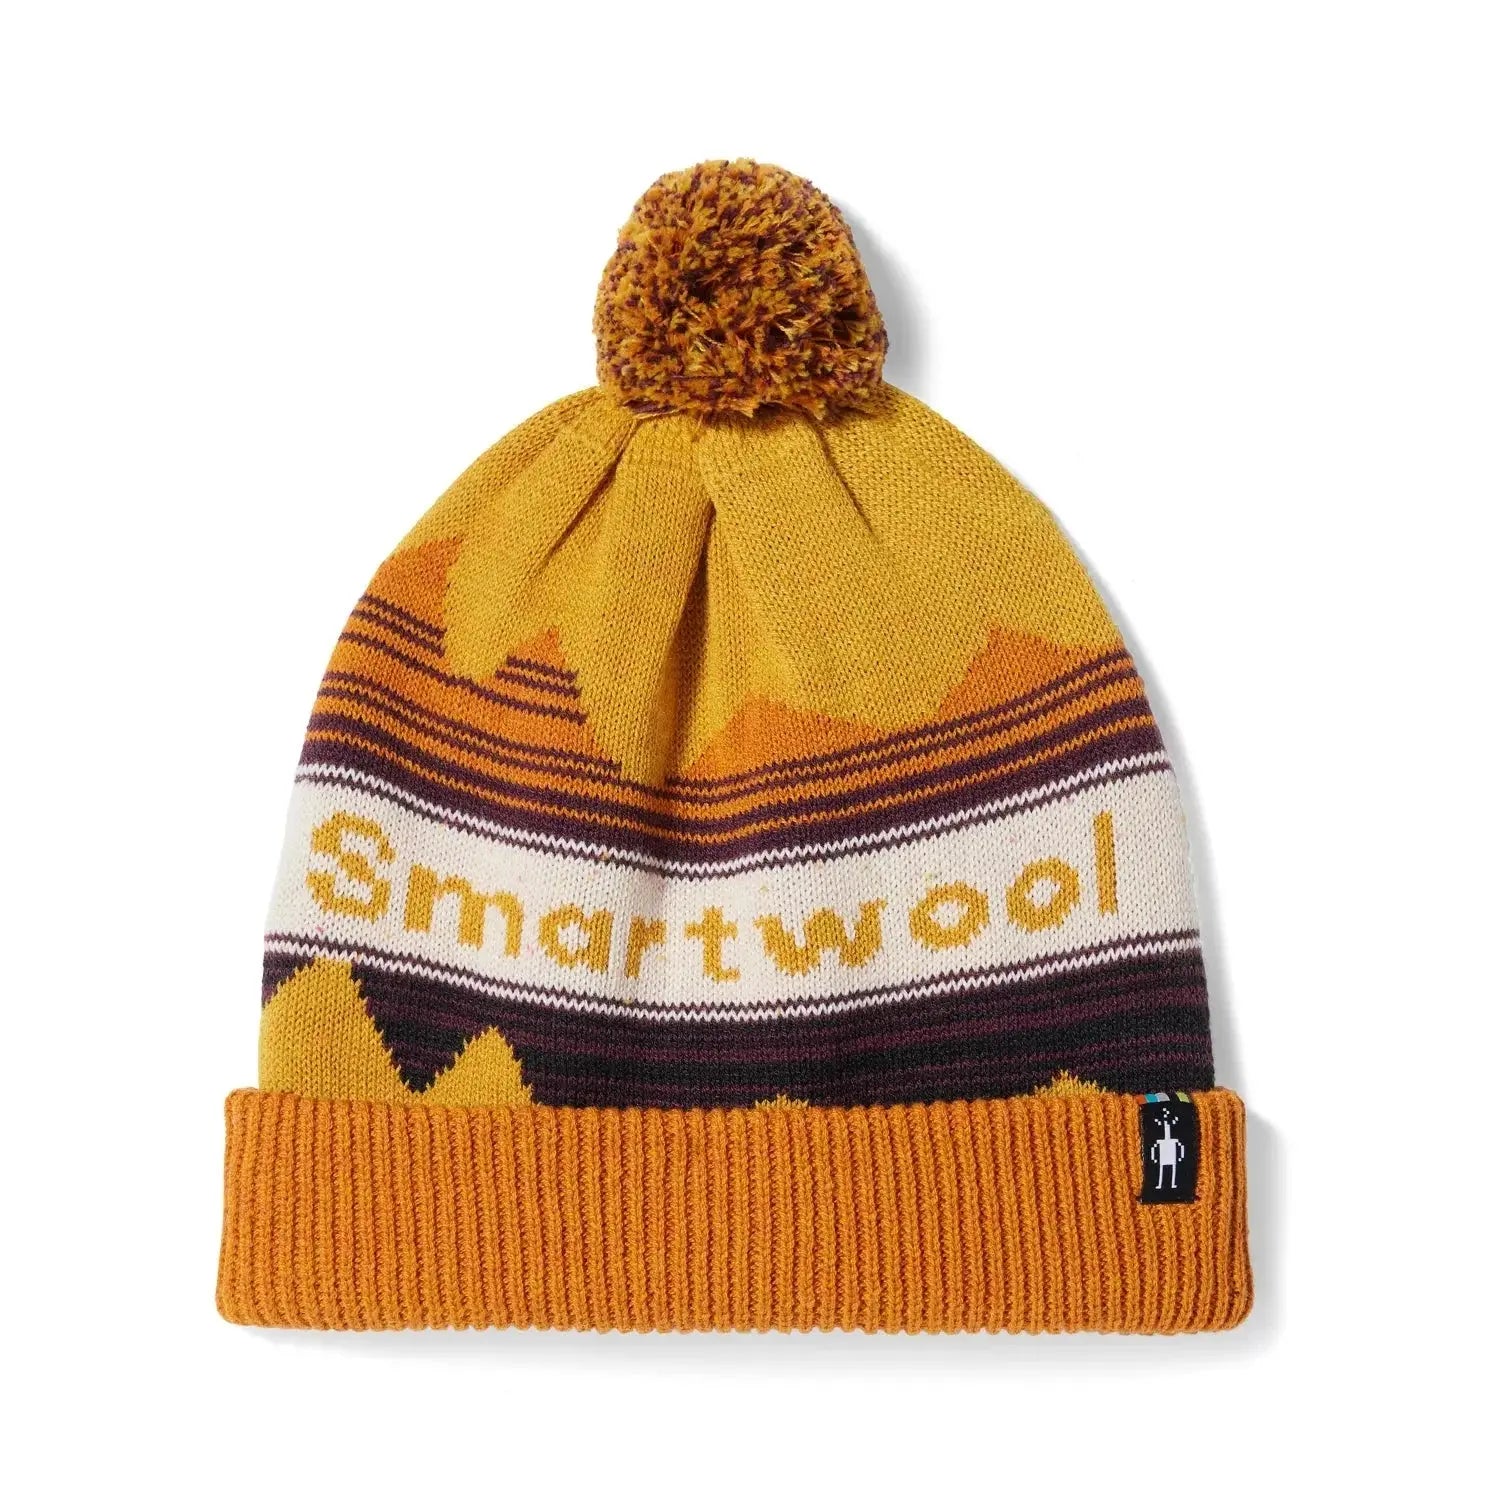 Smartwool Knit Winter Pattern POM Beanie, Honey Gold Heather, front view 